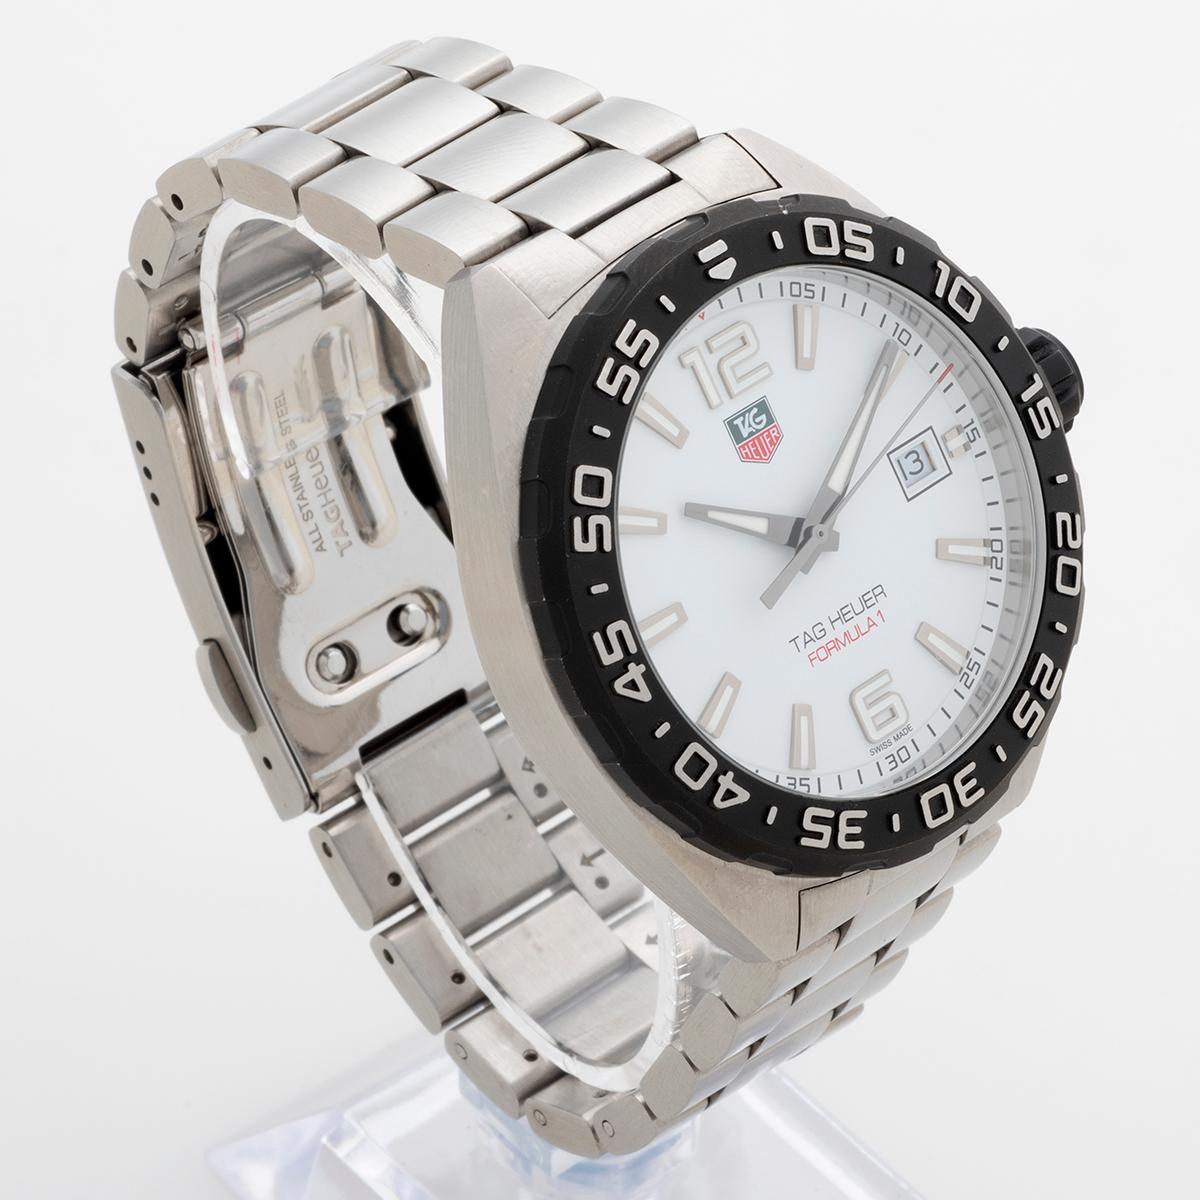 Our discontinued quartz Tag Heuer Formula 1 reference WAZ111 features a 41mm stainless steel case with stainless steel bracelet and very attractive white dial. The white dial formula 1 in this configuration looks greta with the traditional green/red